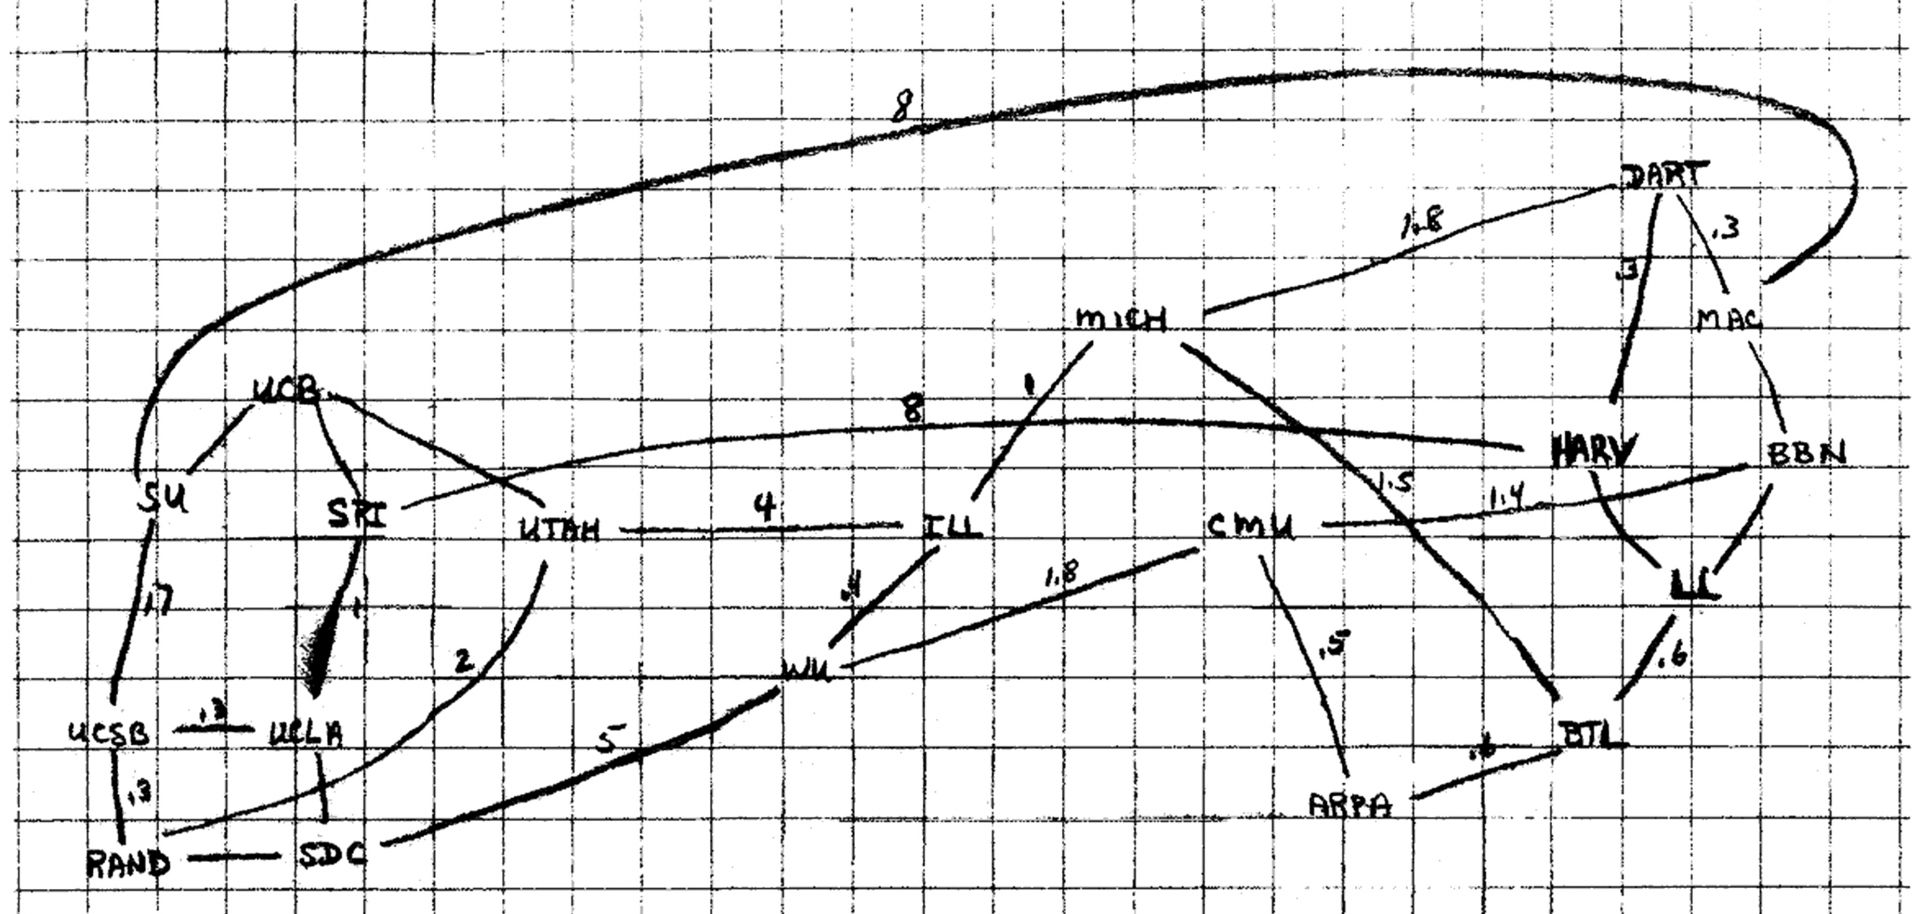 This sketch from 1969 shows the theoretical outlines of a network of linked computers. It was realized in the ARPANET, which formed the backbone of the modern internet.